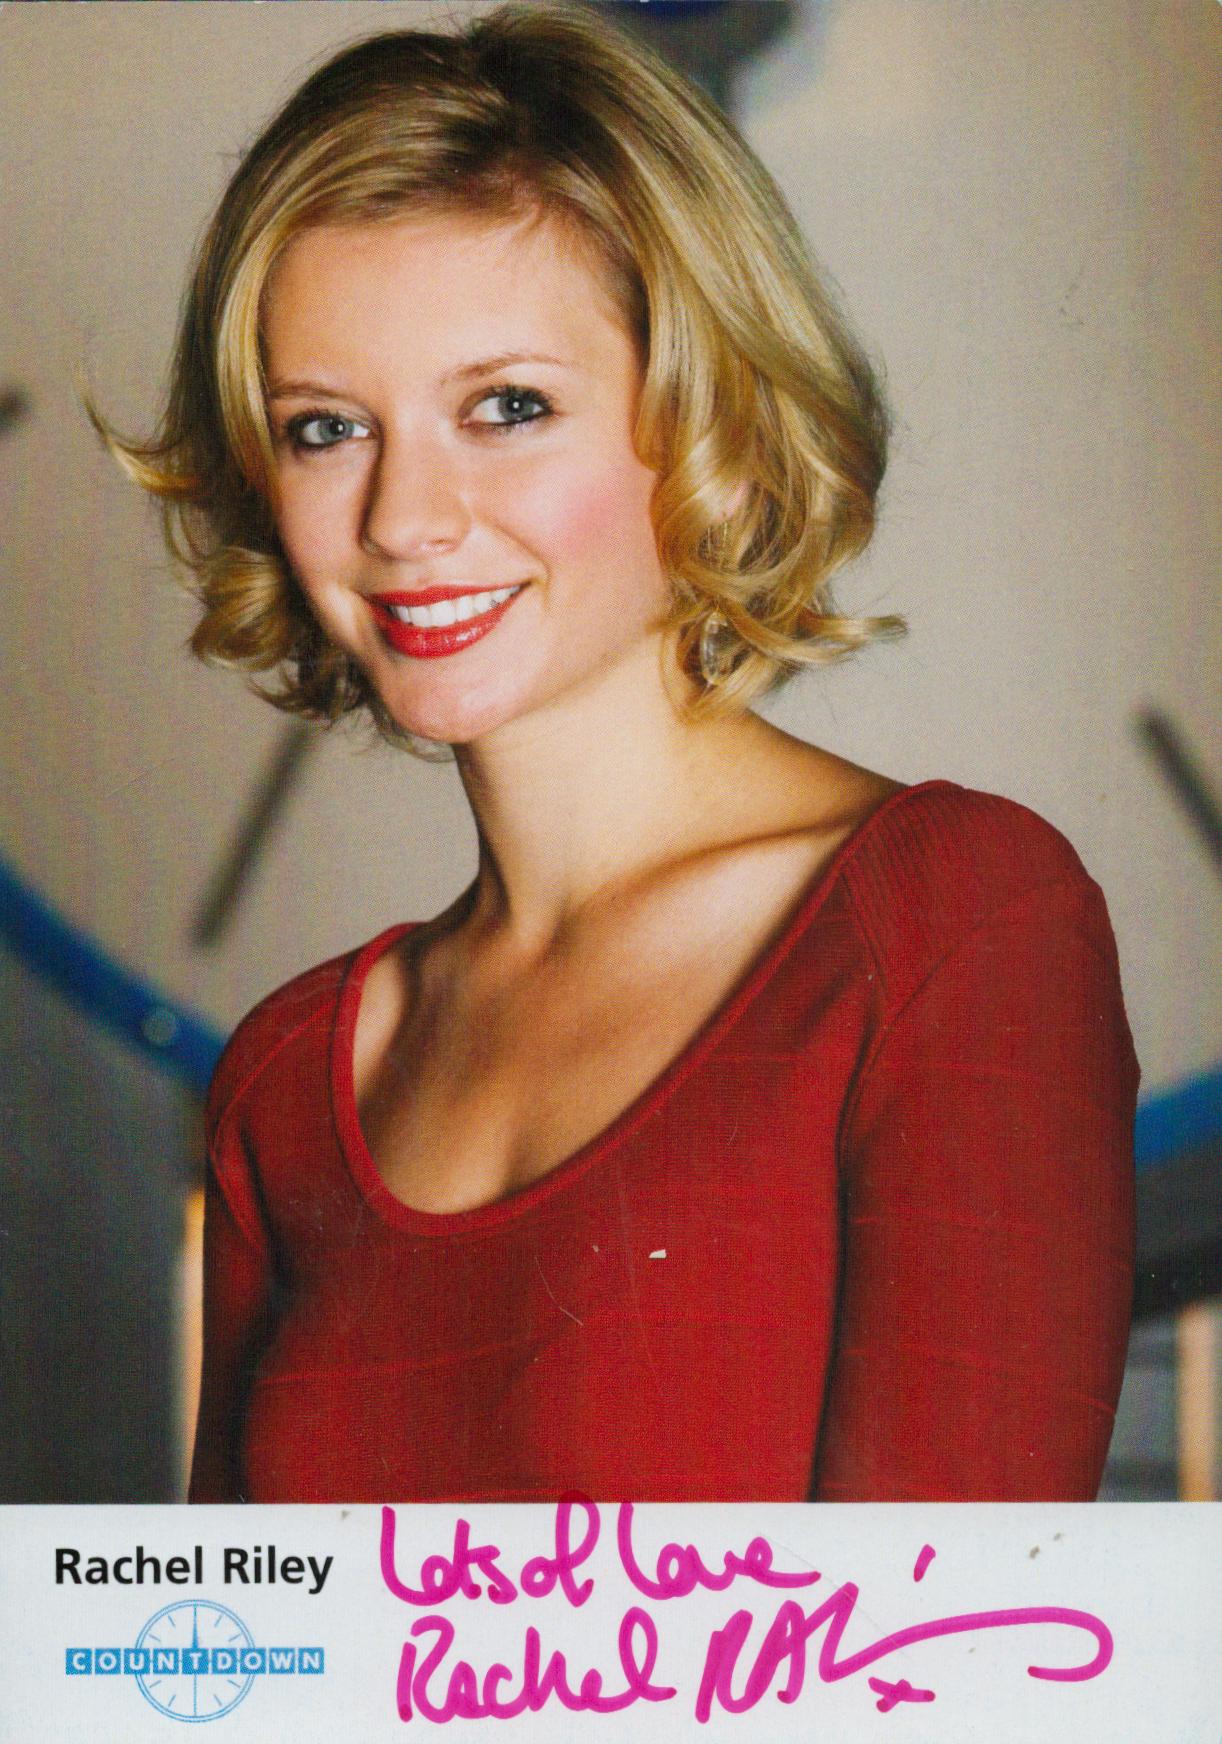 Rachel Riley signed Promo. Colour Photo 6x4 Inch 'COUNTDOWN'. Is a British television presenter. She